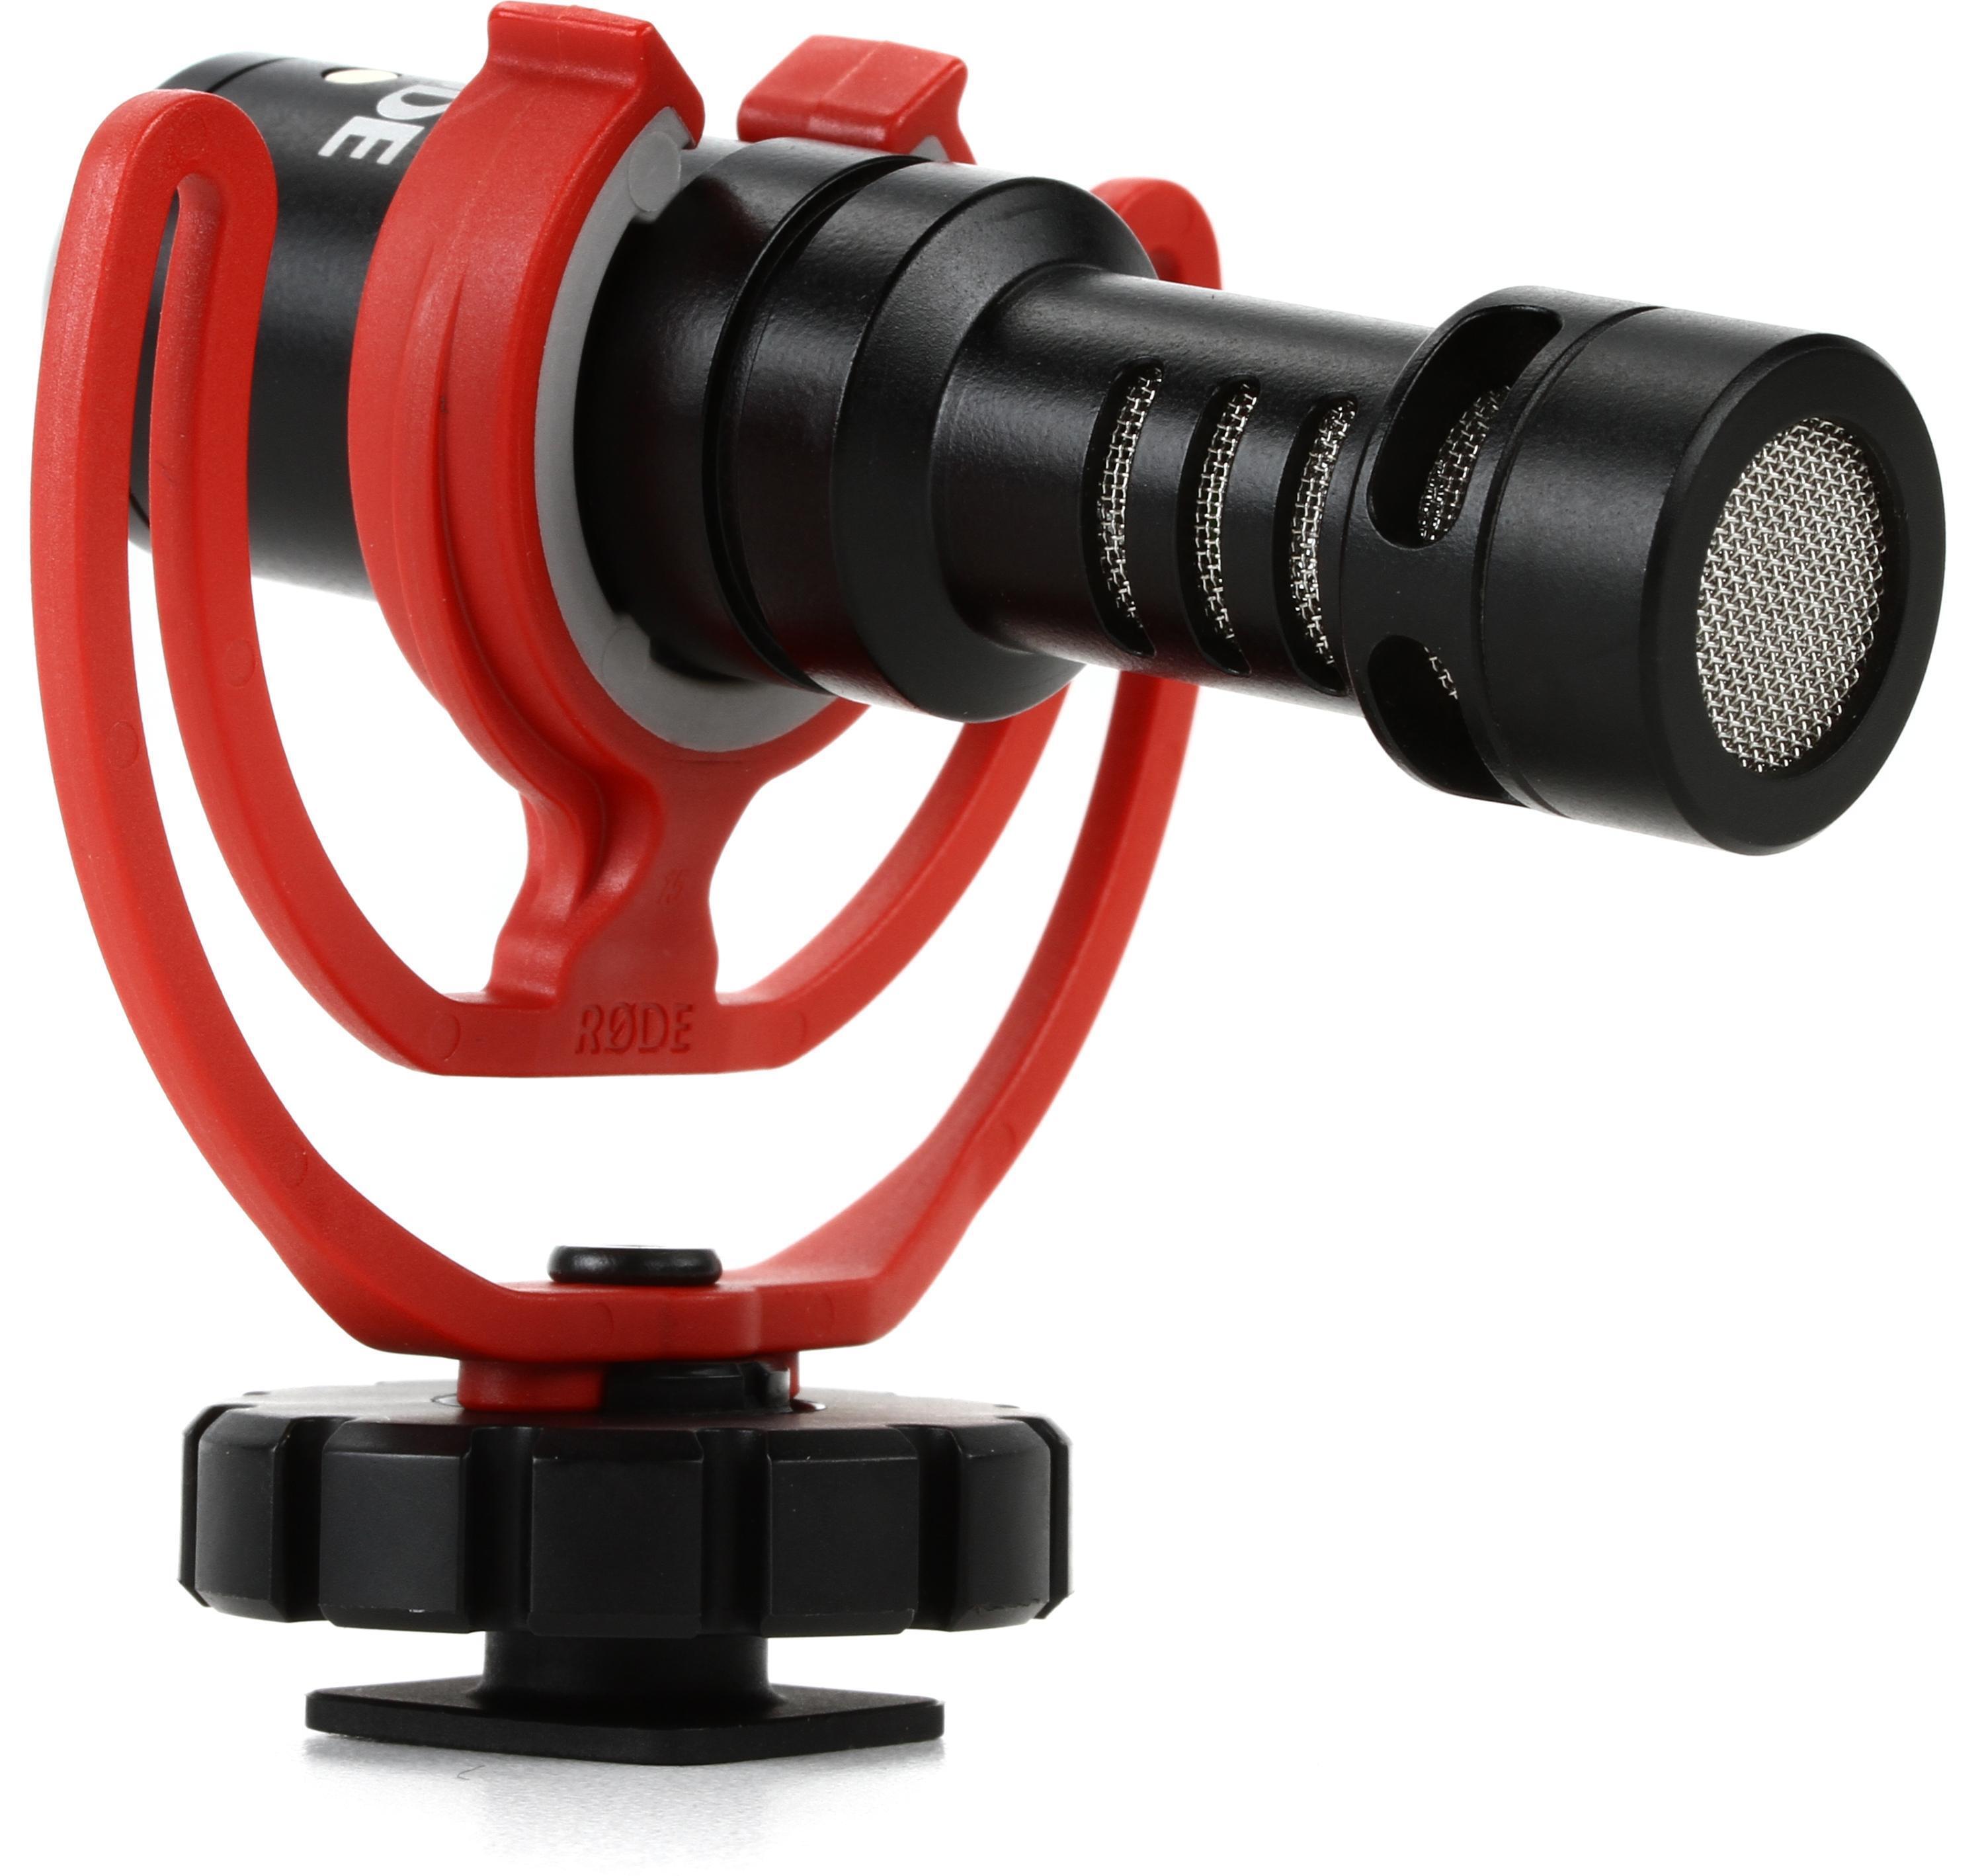  Rode VideoMicro Compact On-Camera Microphone with